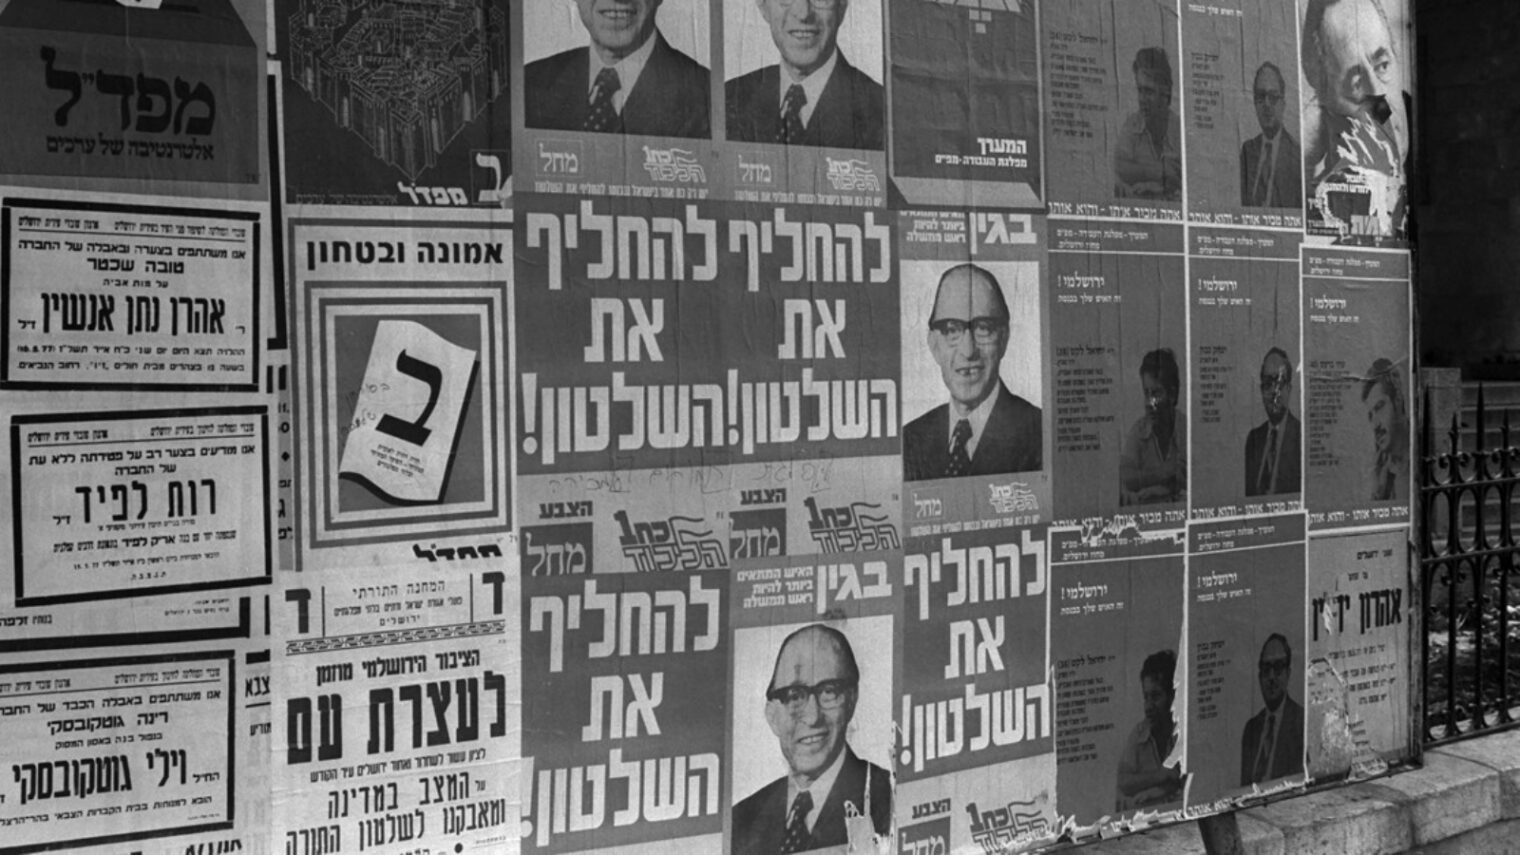 Elections 1977 – Likud posters] In 1977, Menahem Begin led an election upset as Israel’s first non-Labor prime minister. Credit: GPO